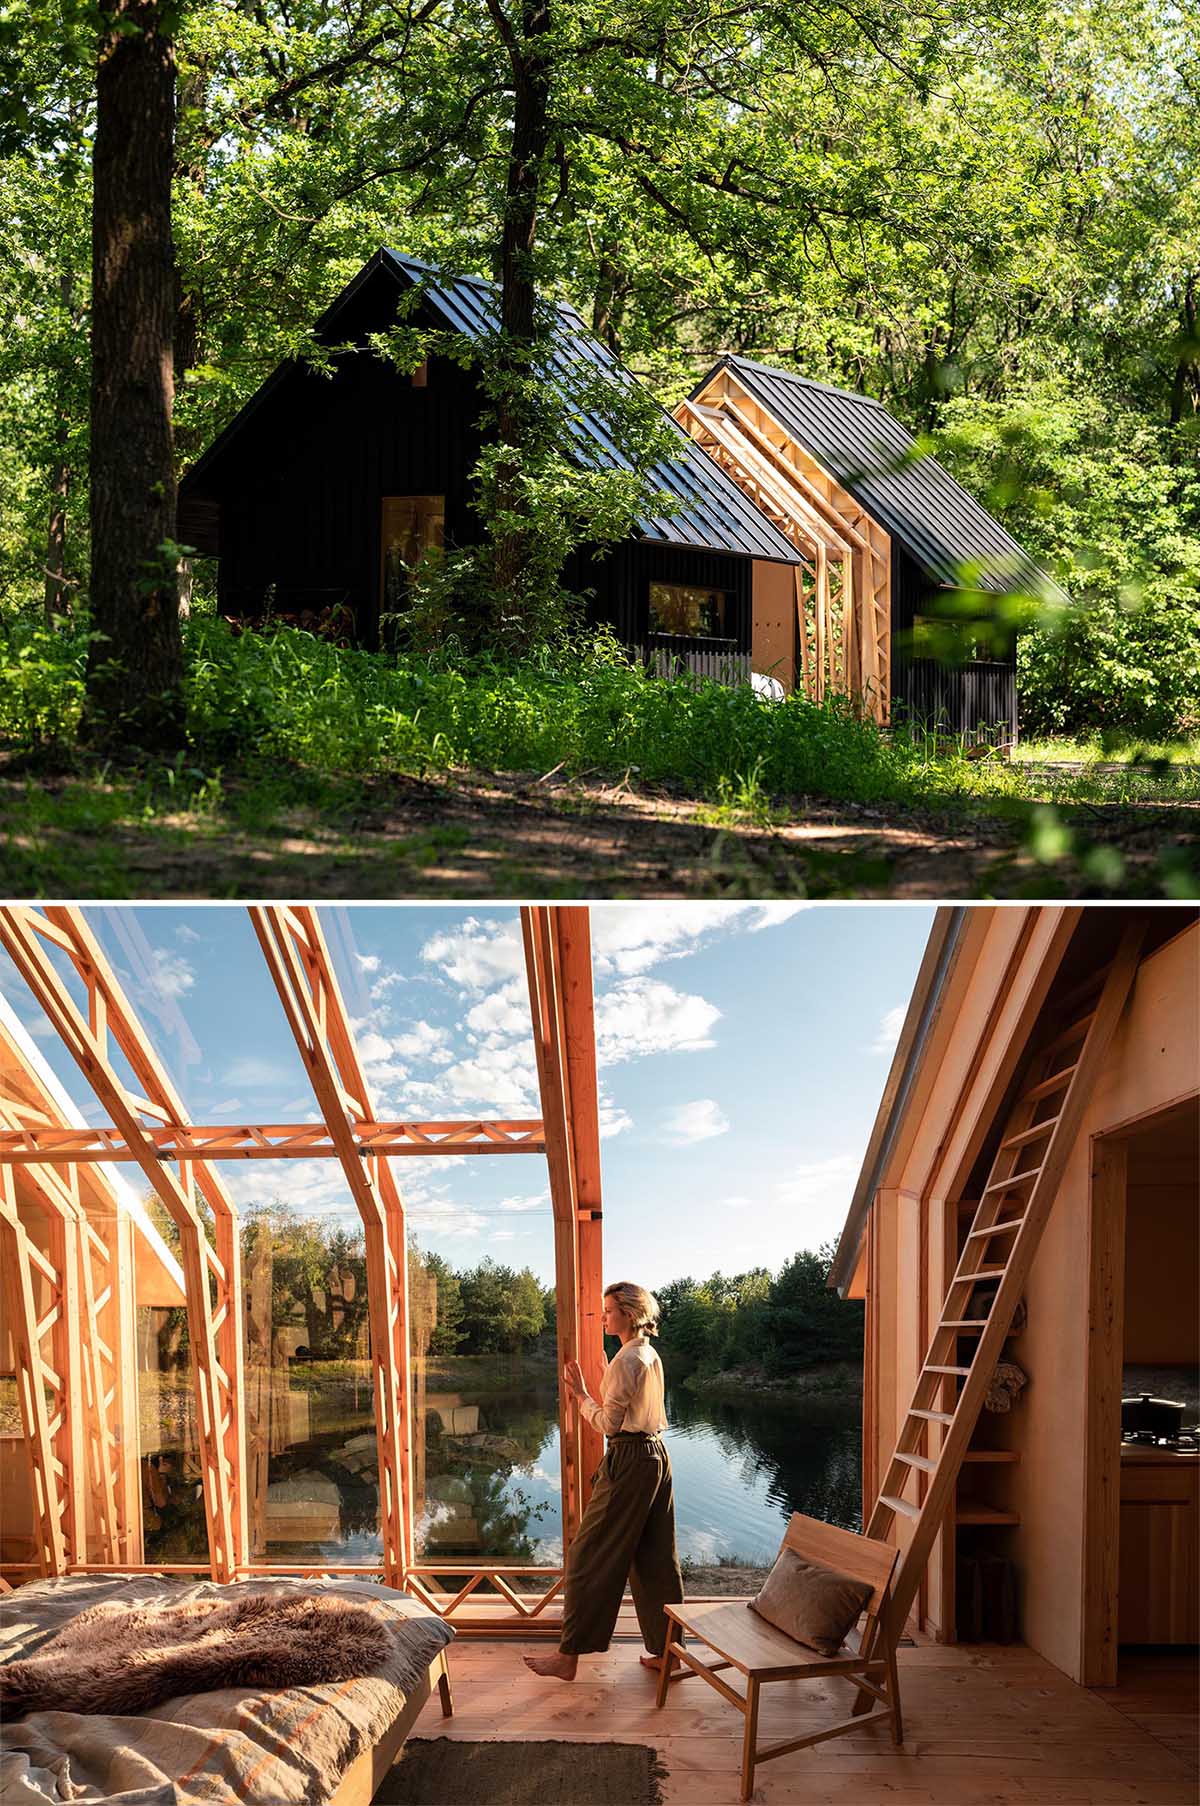 A versatile small and modern wood cabin with two different ‘shells’ as outer walls, which are supported on rails, allowing the interior to be open to the outdoors.